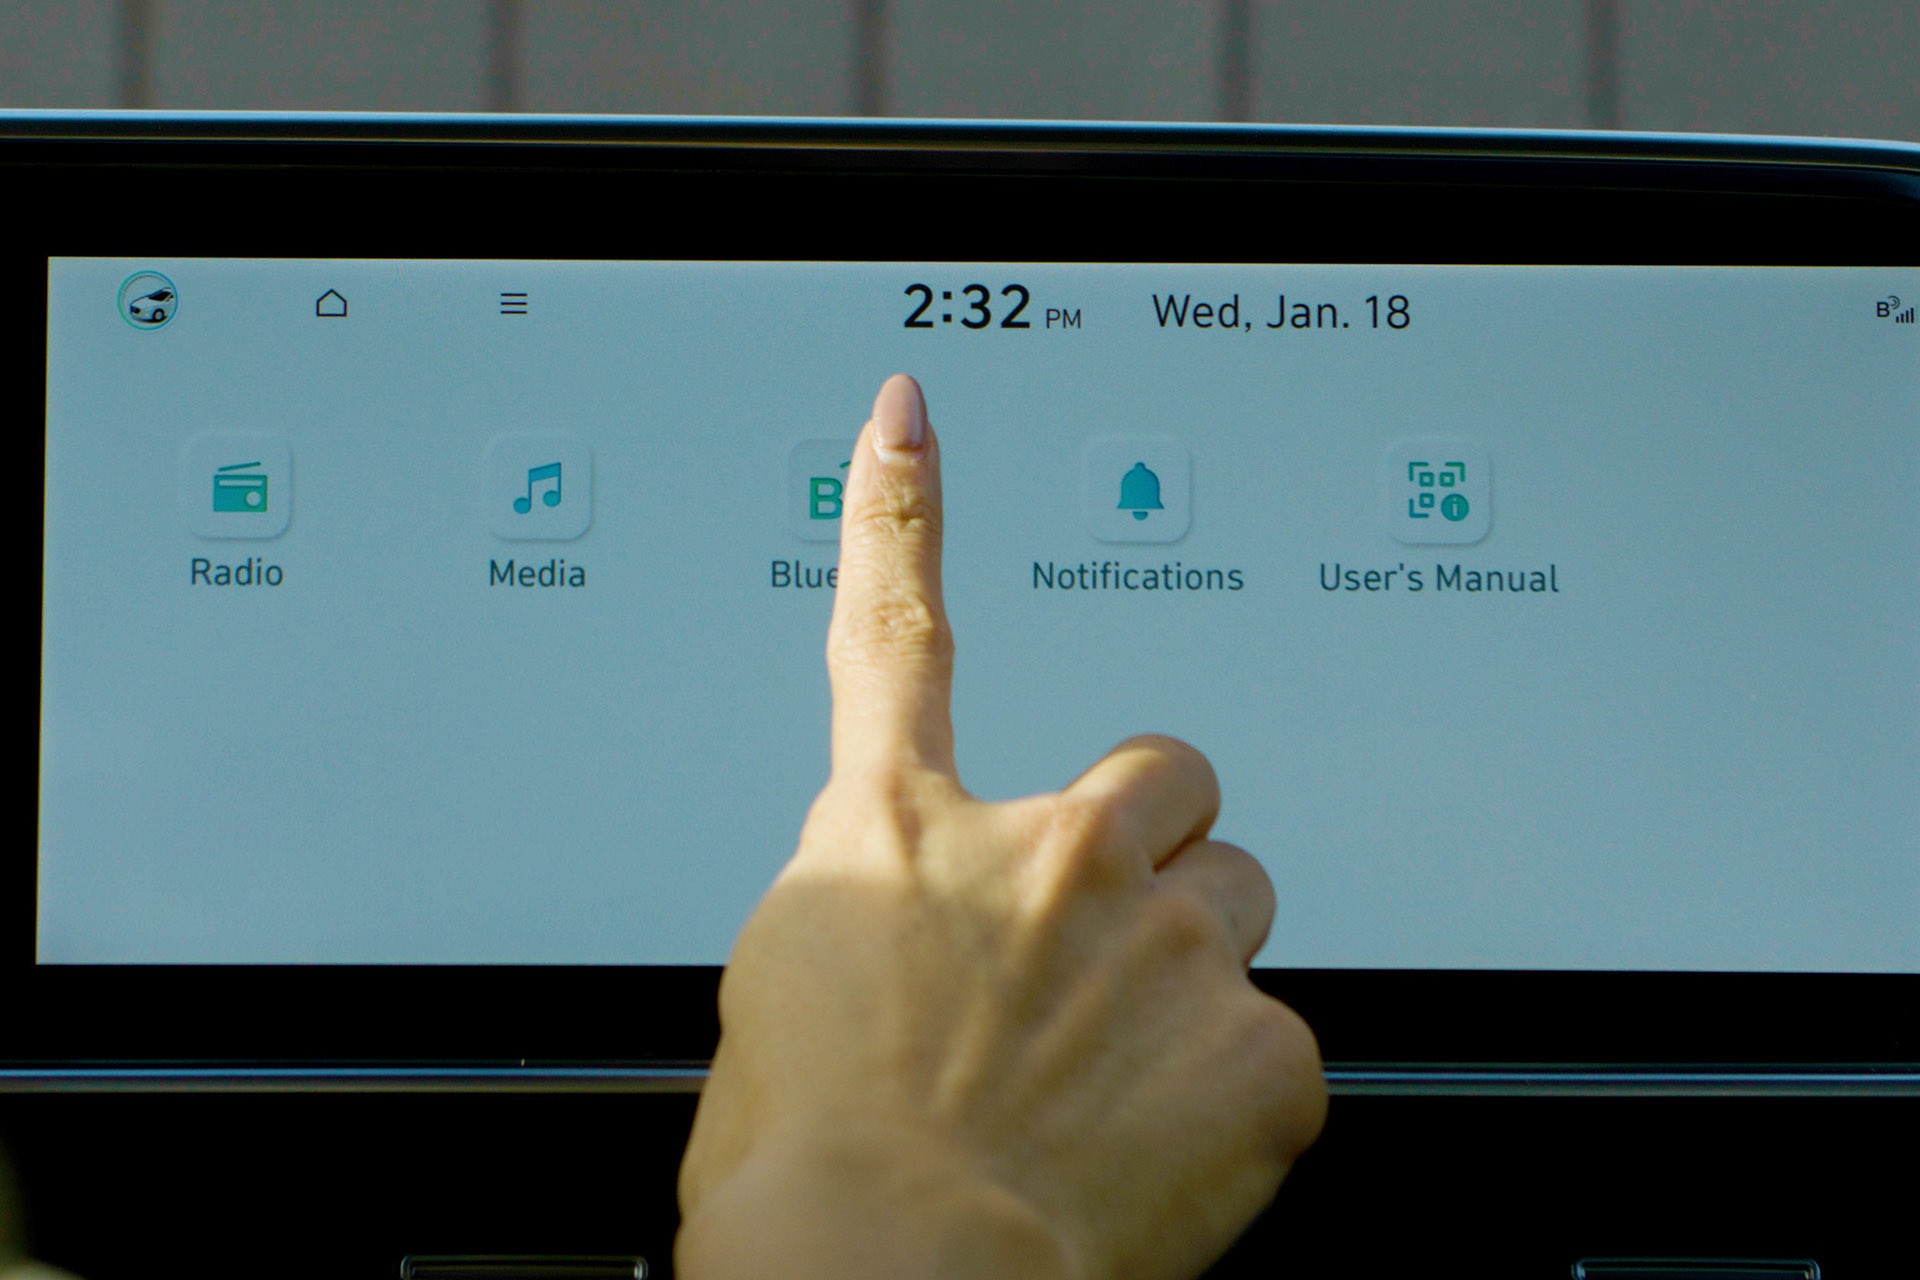 Person's hand hovers over Hyundai infotainment screen